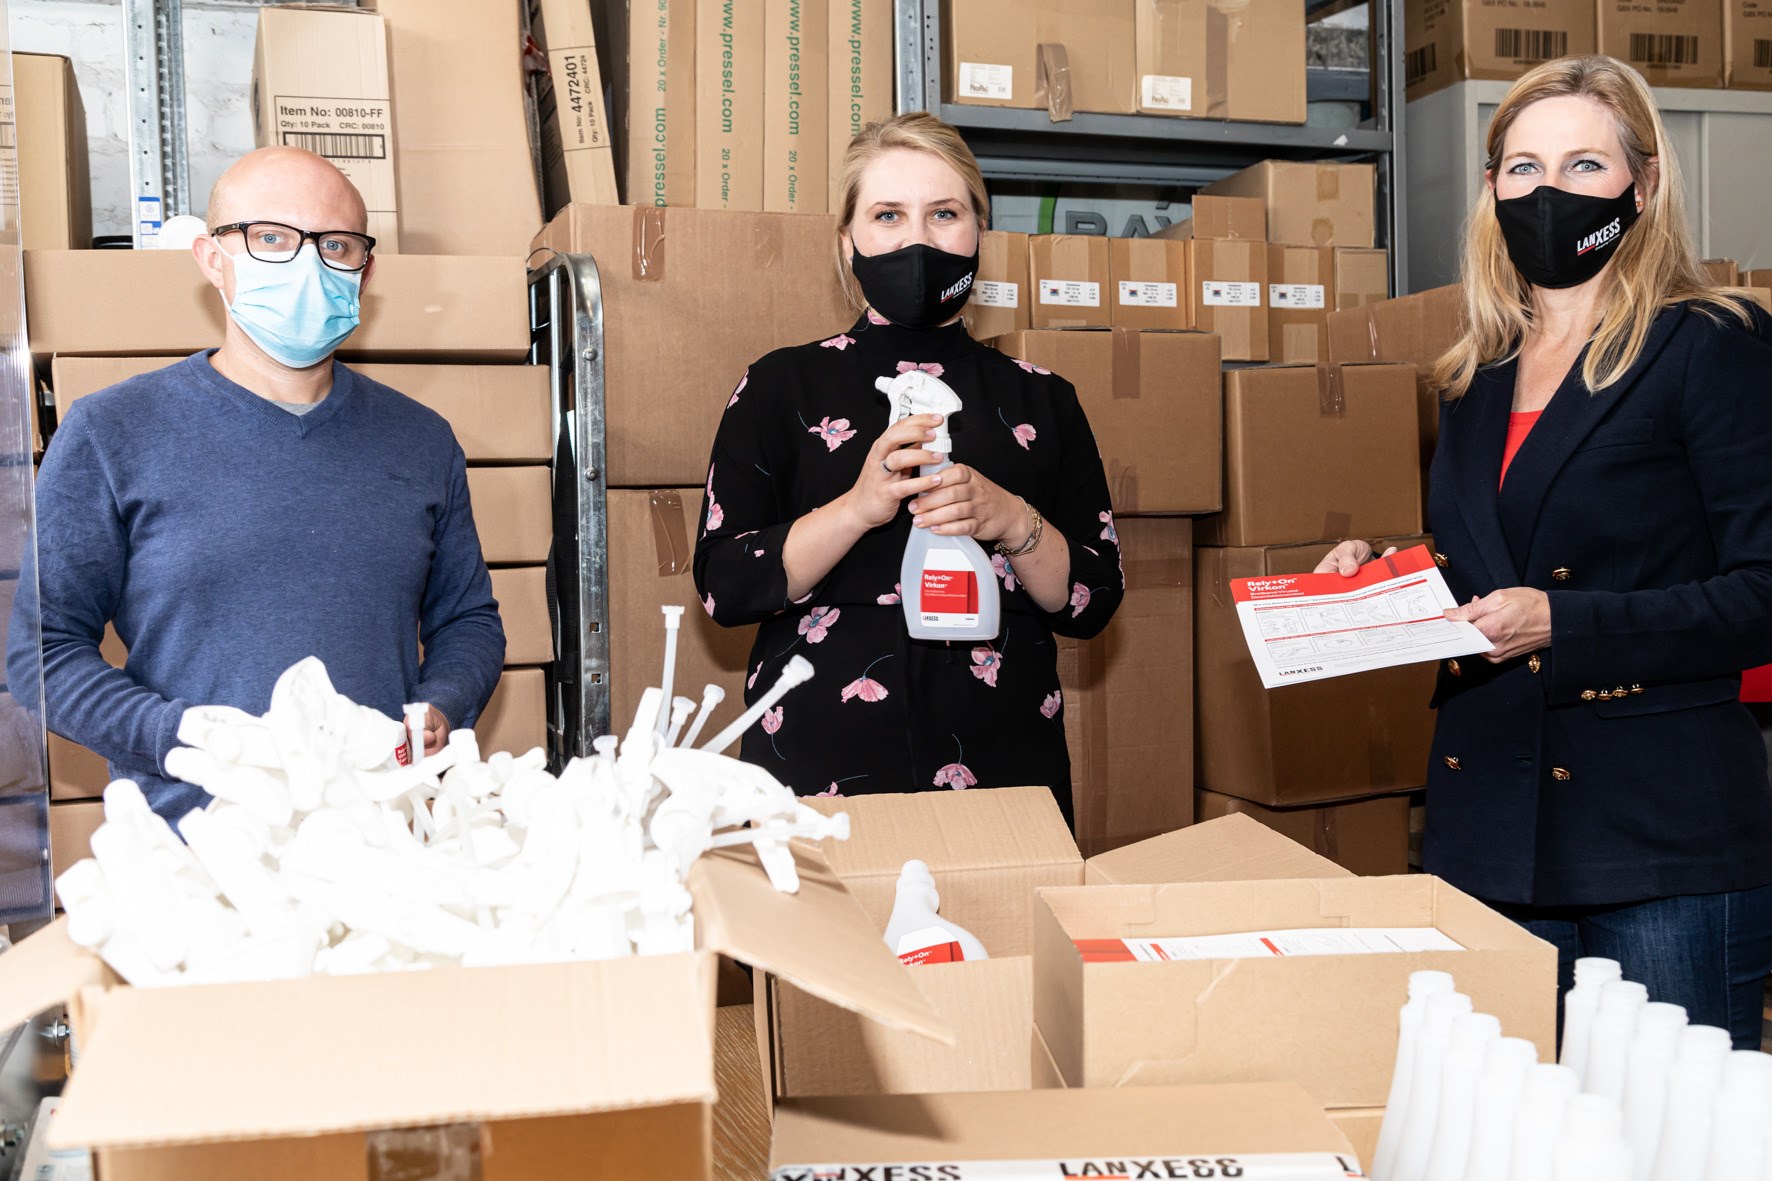 Anneliese Bischof (centre), head of the business with
disinfectants, and Nina Hasenkamp, head of the LANXESS education initiative,
packaging together with Michael Brand from the
Leverkusen-based forwarding agent Brand is making the Rely+On-Virkon donations for all
Schools in the vicinity of the LANXESS sites.